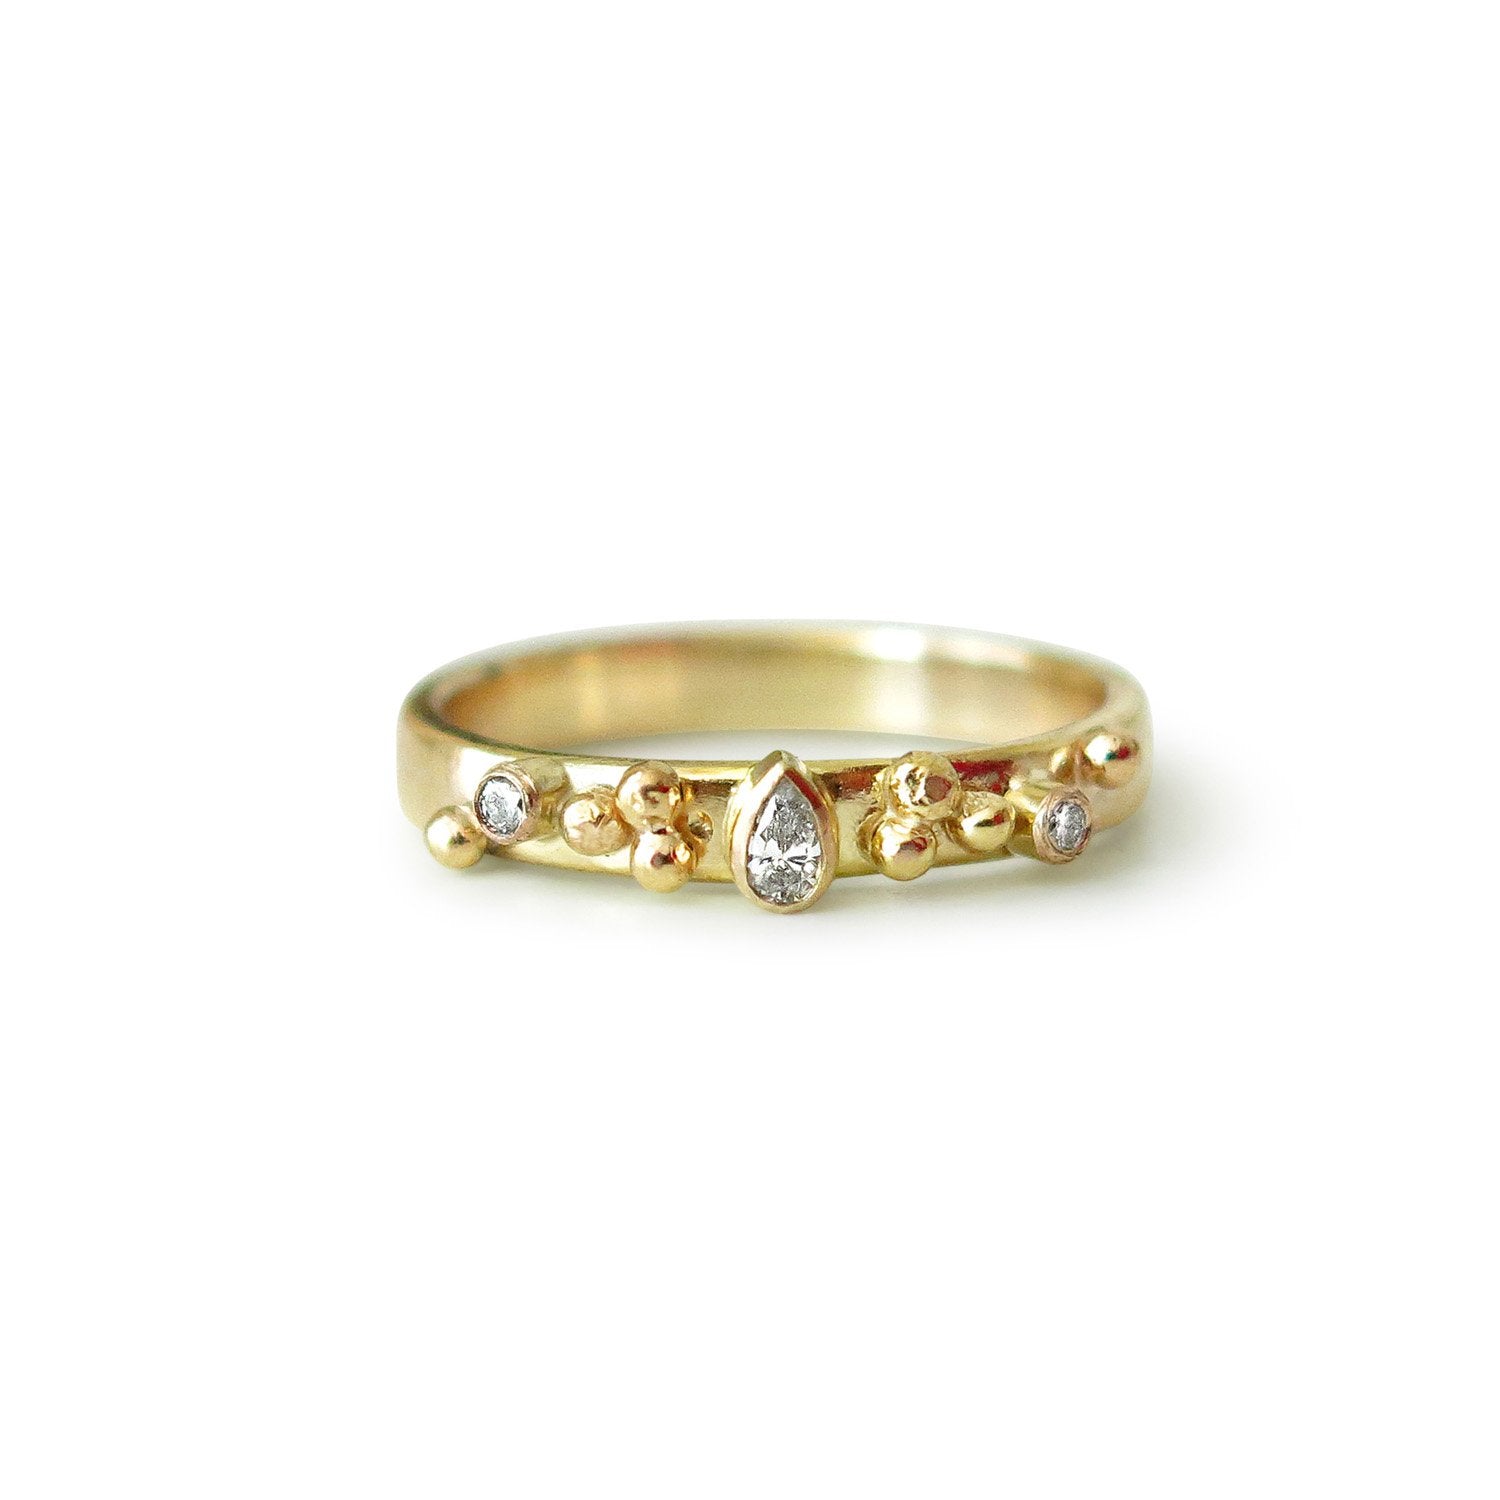 Pear Shape Diamond Ring with 2 Accent Diamonds and Gold Balls